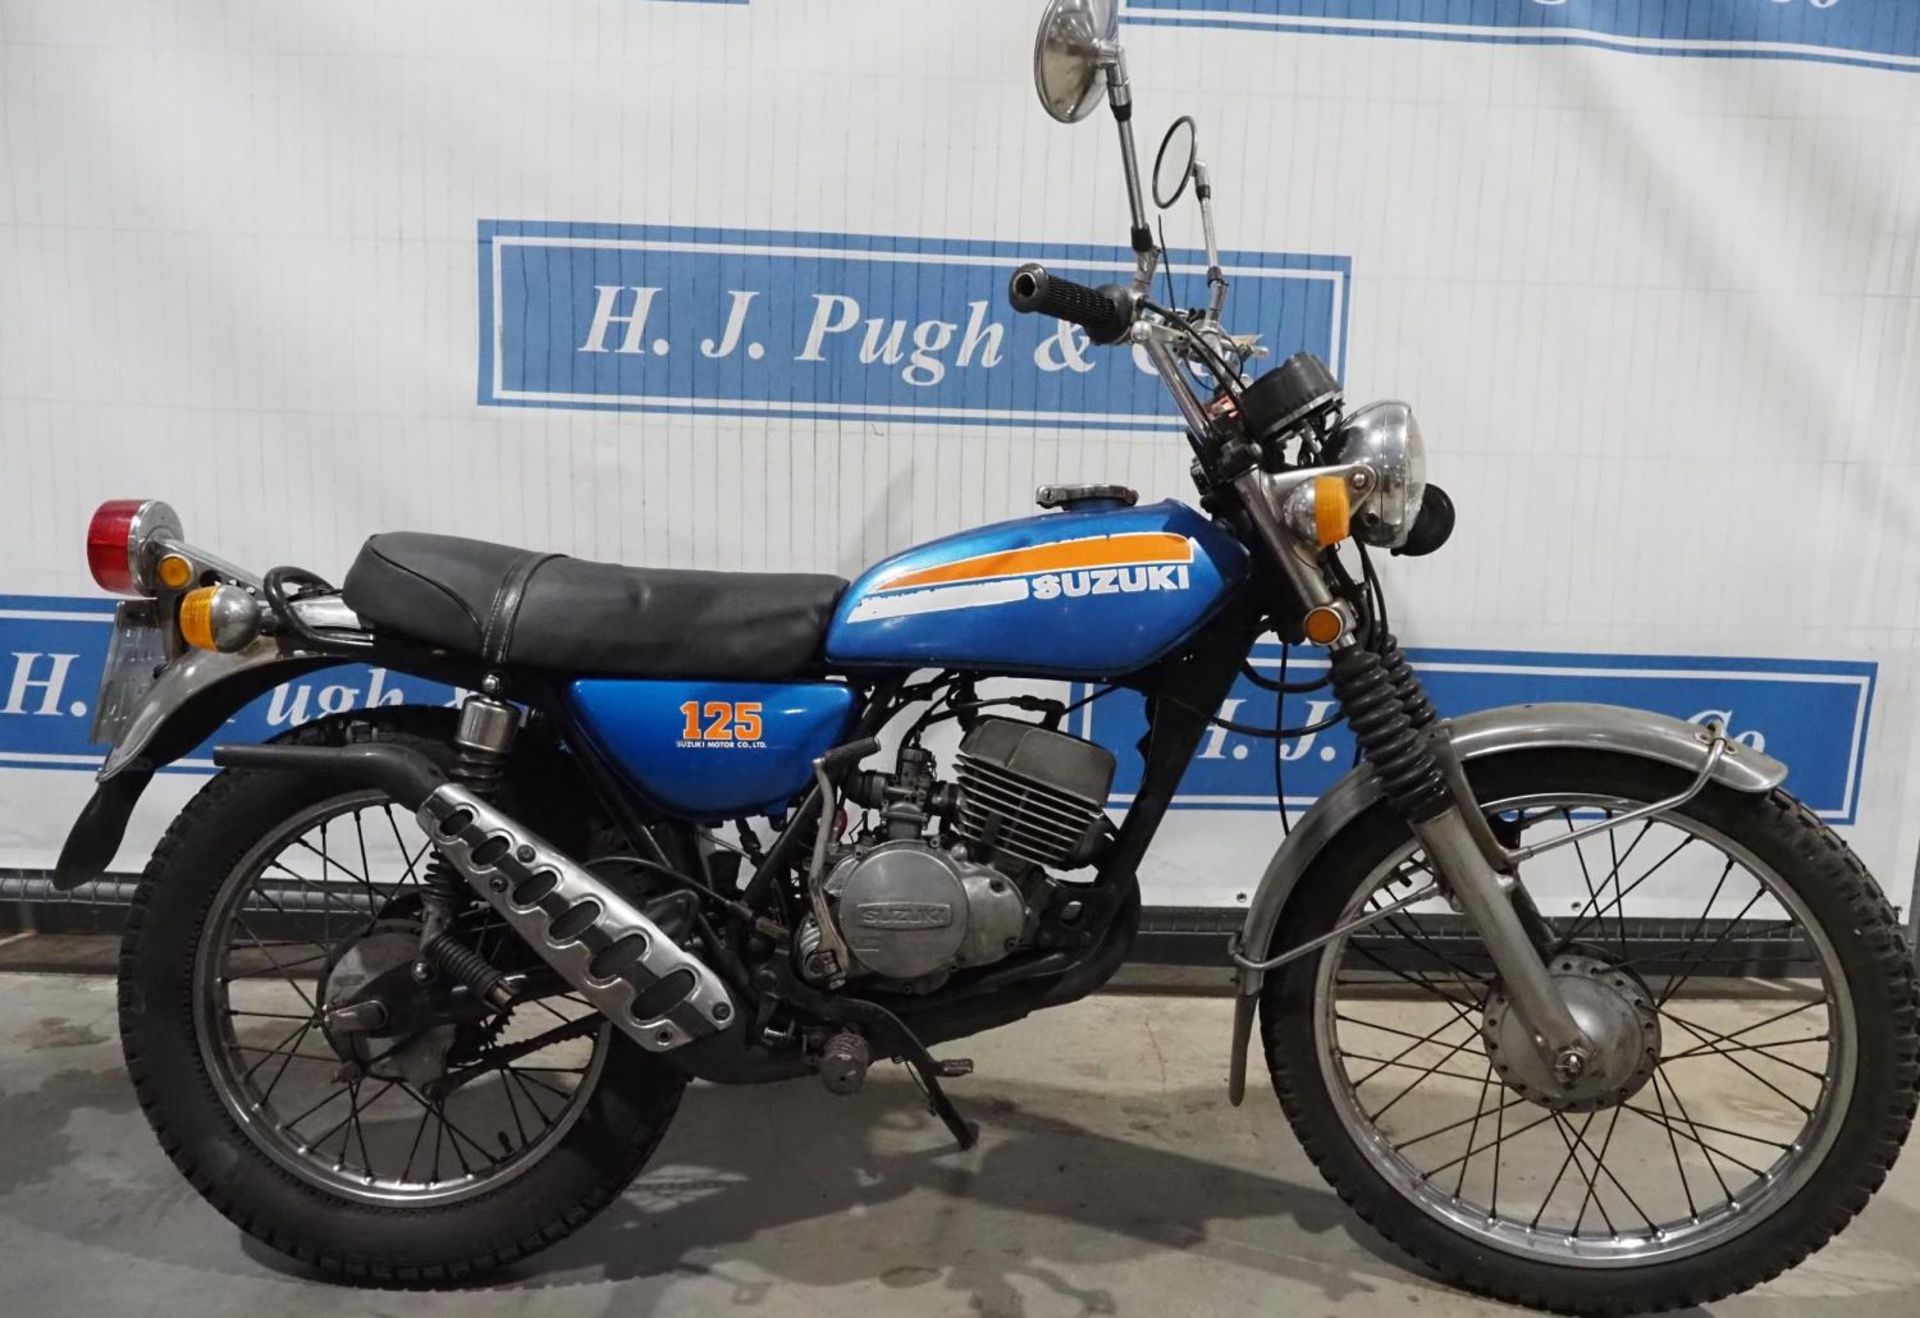 Suzuki TS125 motorcycle. 123cc. 1974. Good runner, used regularly but not recently. Reg. BWP 891M.